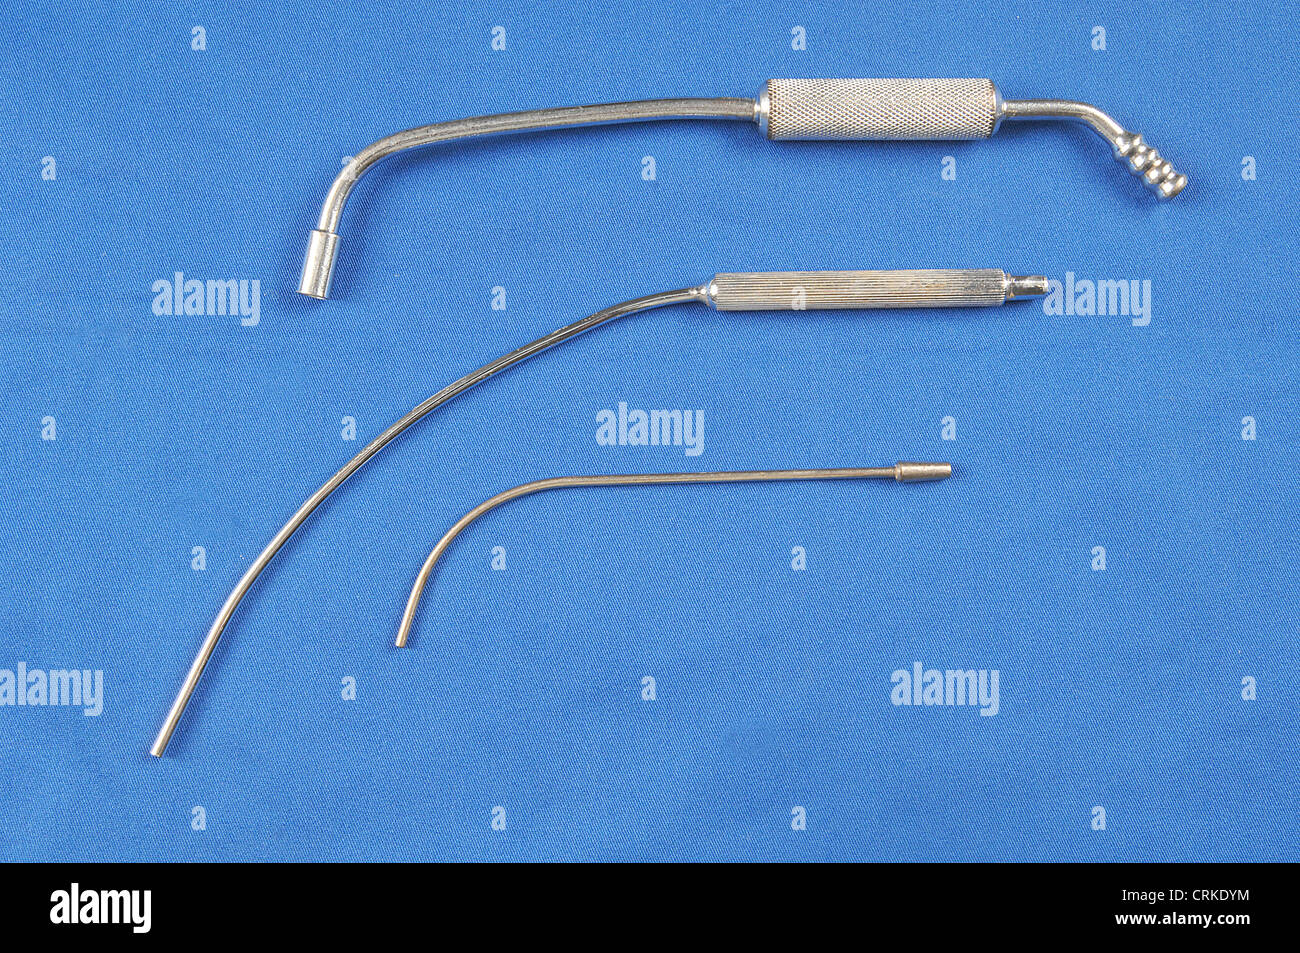 A range of surgical suction tips in varying sizes. Stock Photo